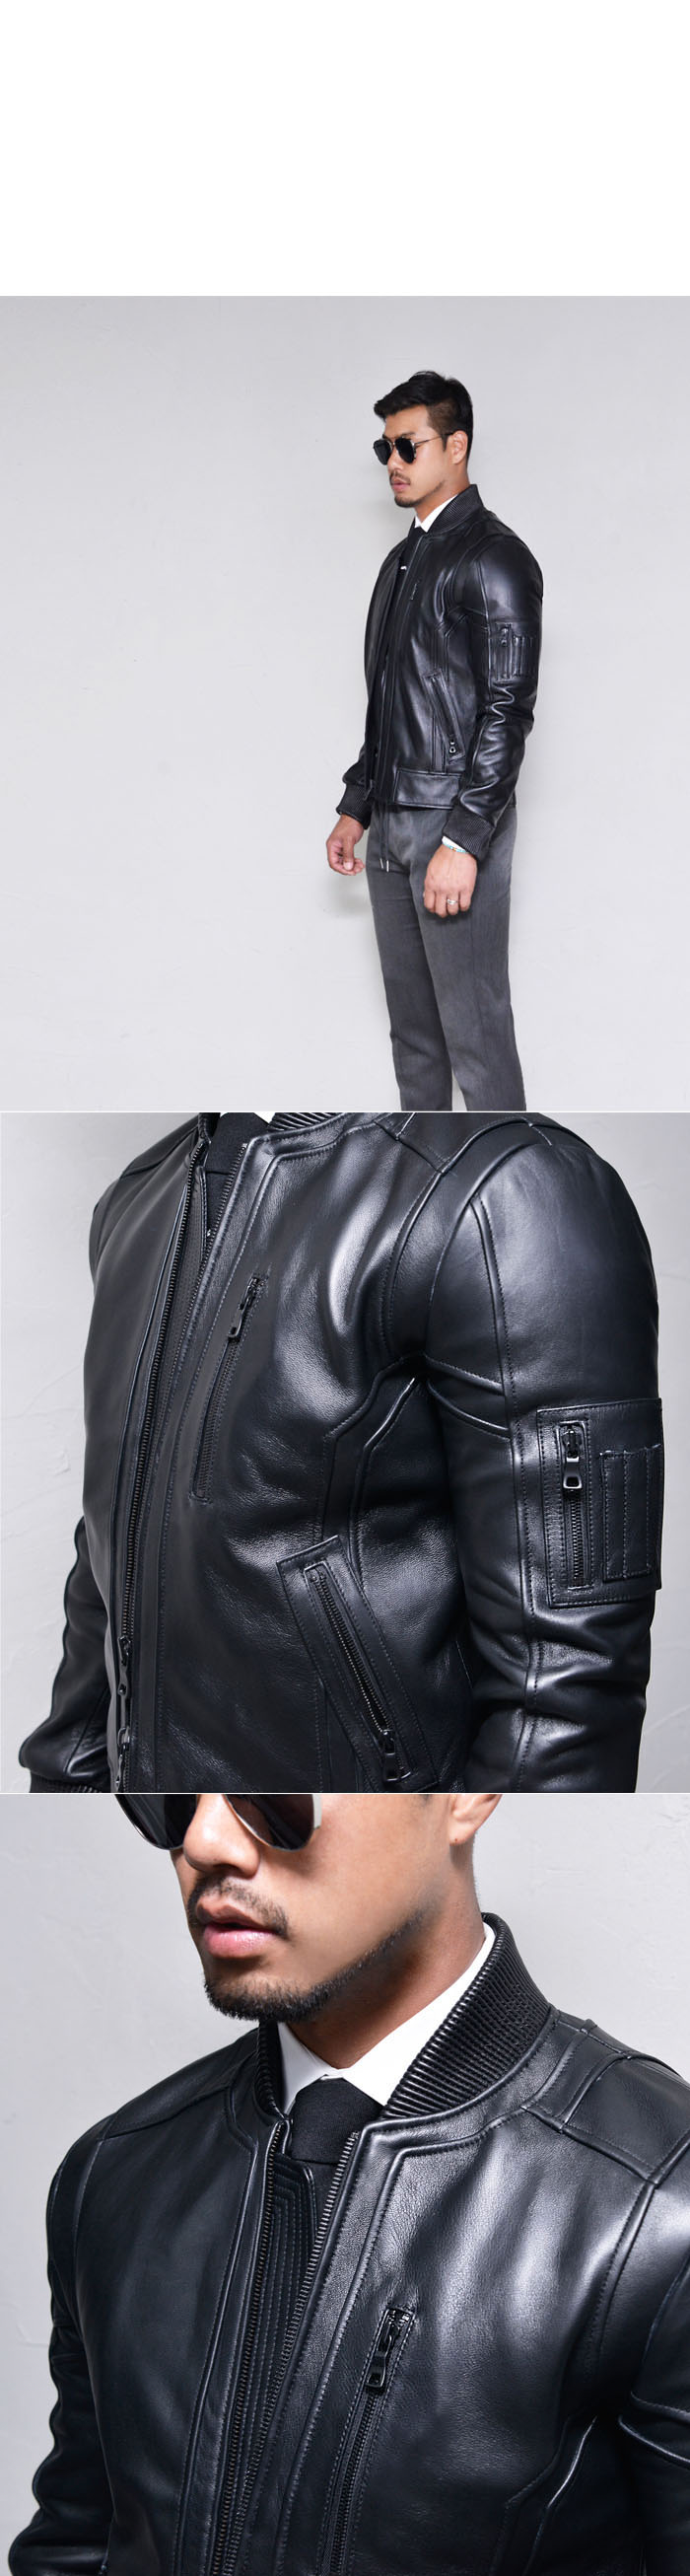 Leather141_8